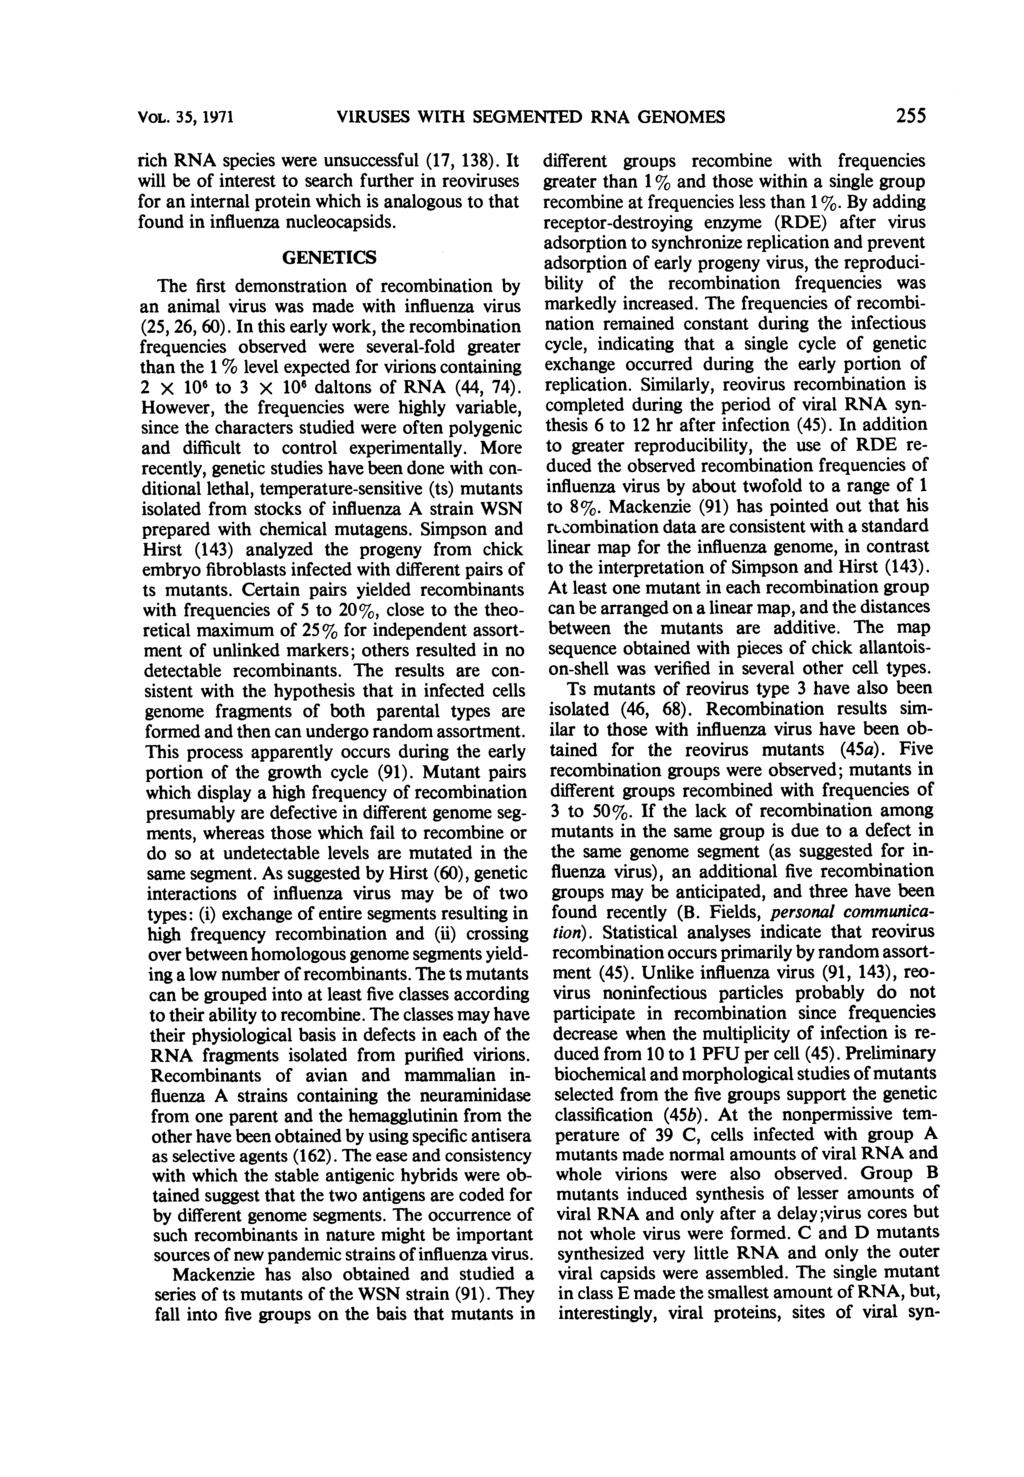 VOL. 35, 1971 rich RNA species were unsuccessful (17, 138). It will be of interest to search further in reoviruses for an internal protein which is analogous to that found in influenza nucleocapsids.